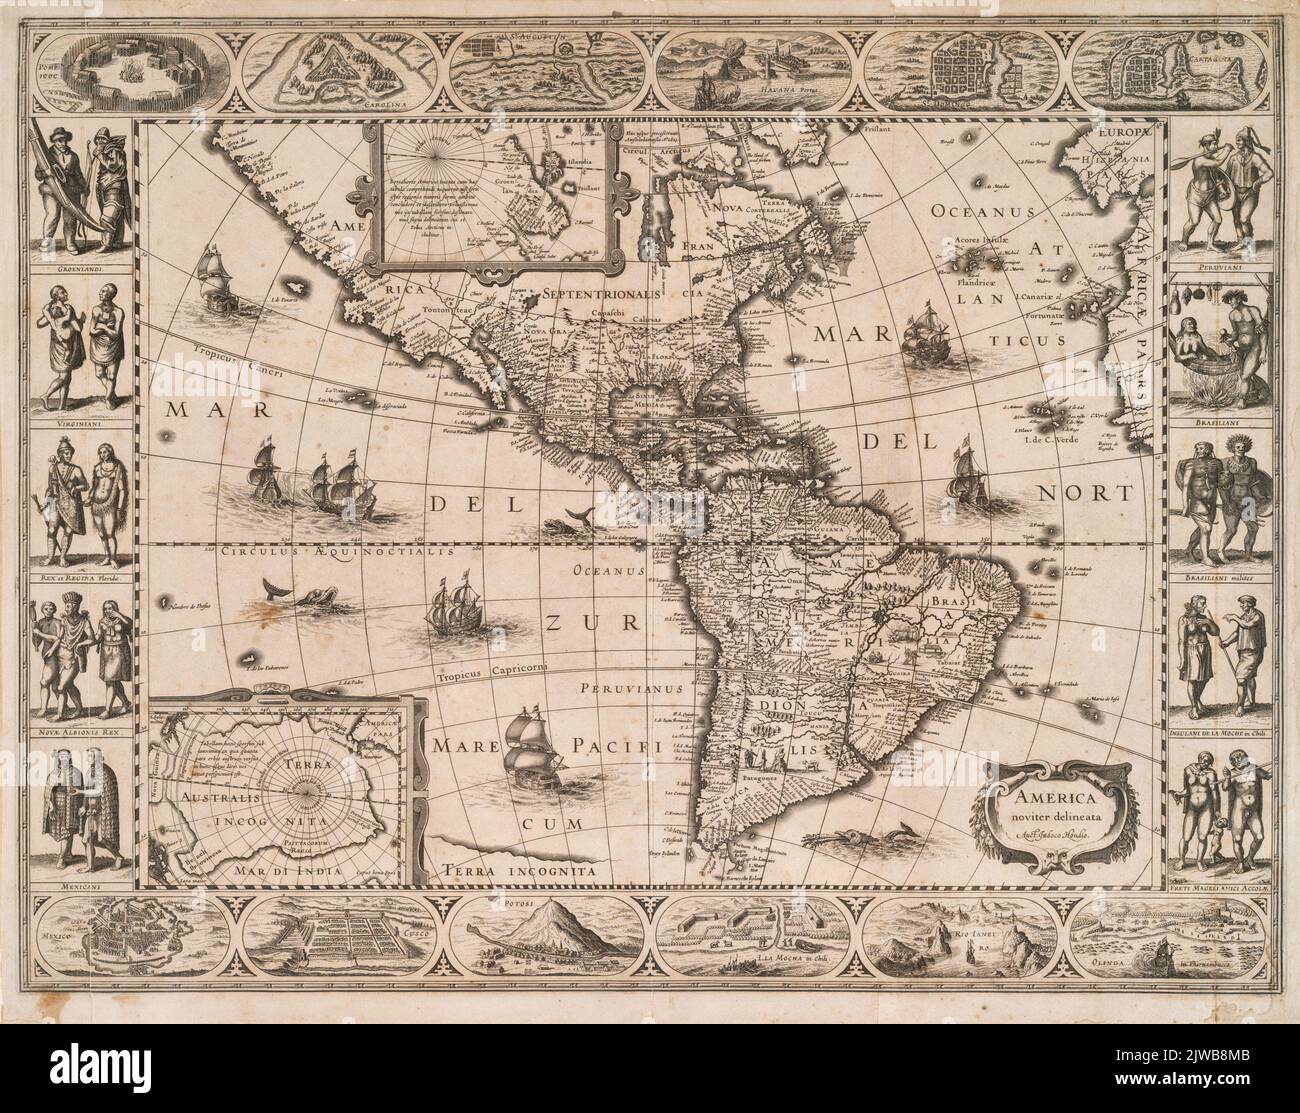 Illustrated new map of the Americas by cartographer Joducus Hondius ca. 1590 Stock Photo